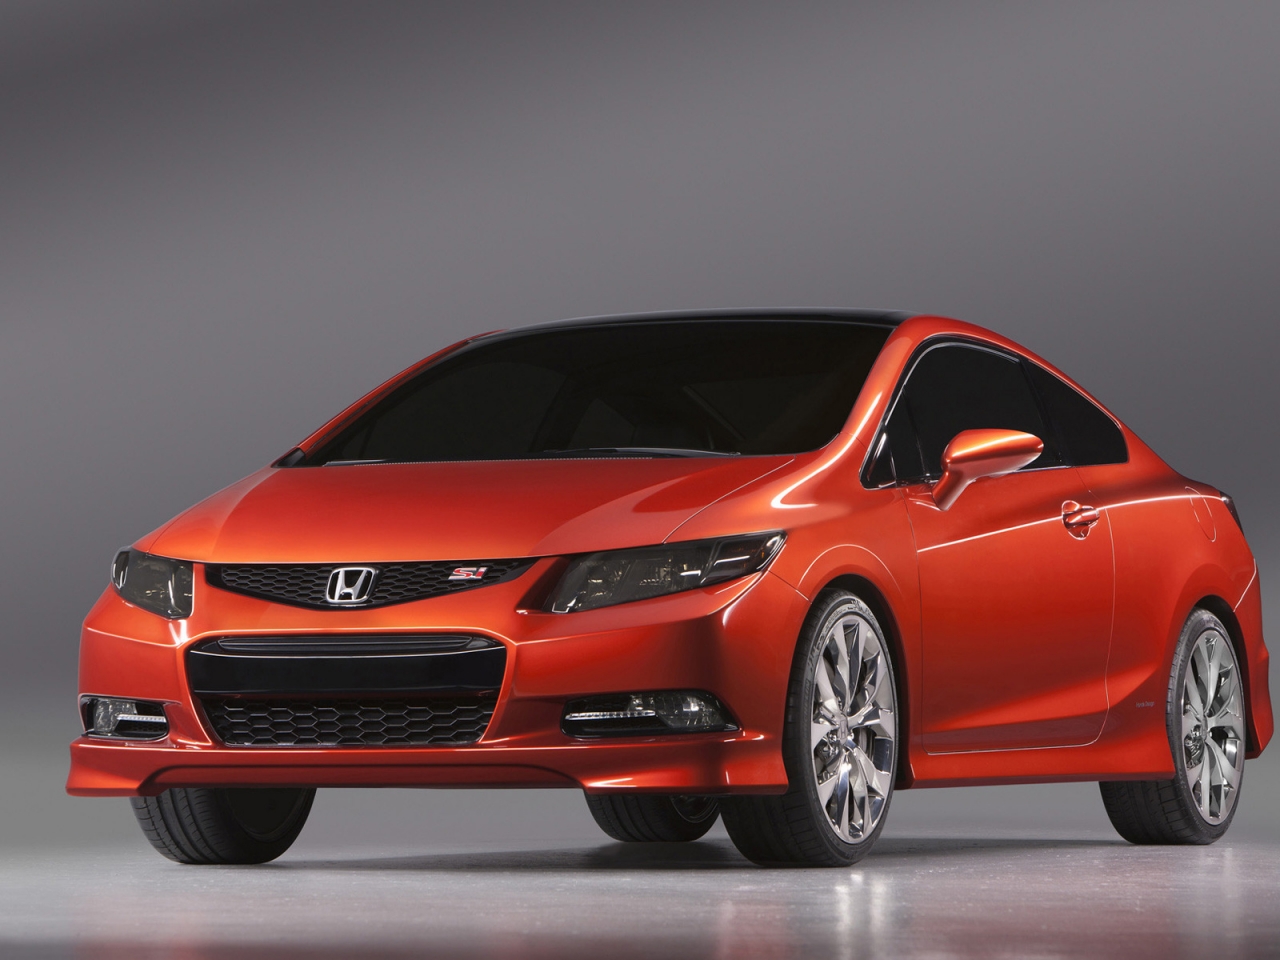 2011 Honda Civic Si Concept for 1280 x 960 resolution